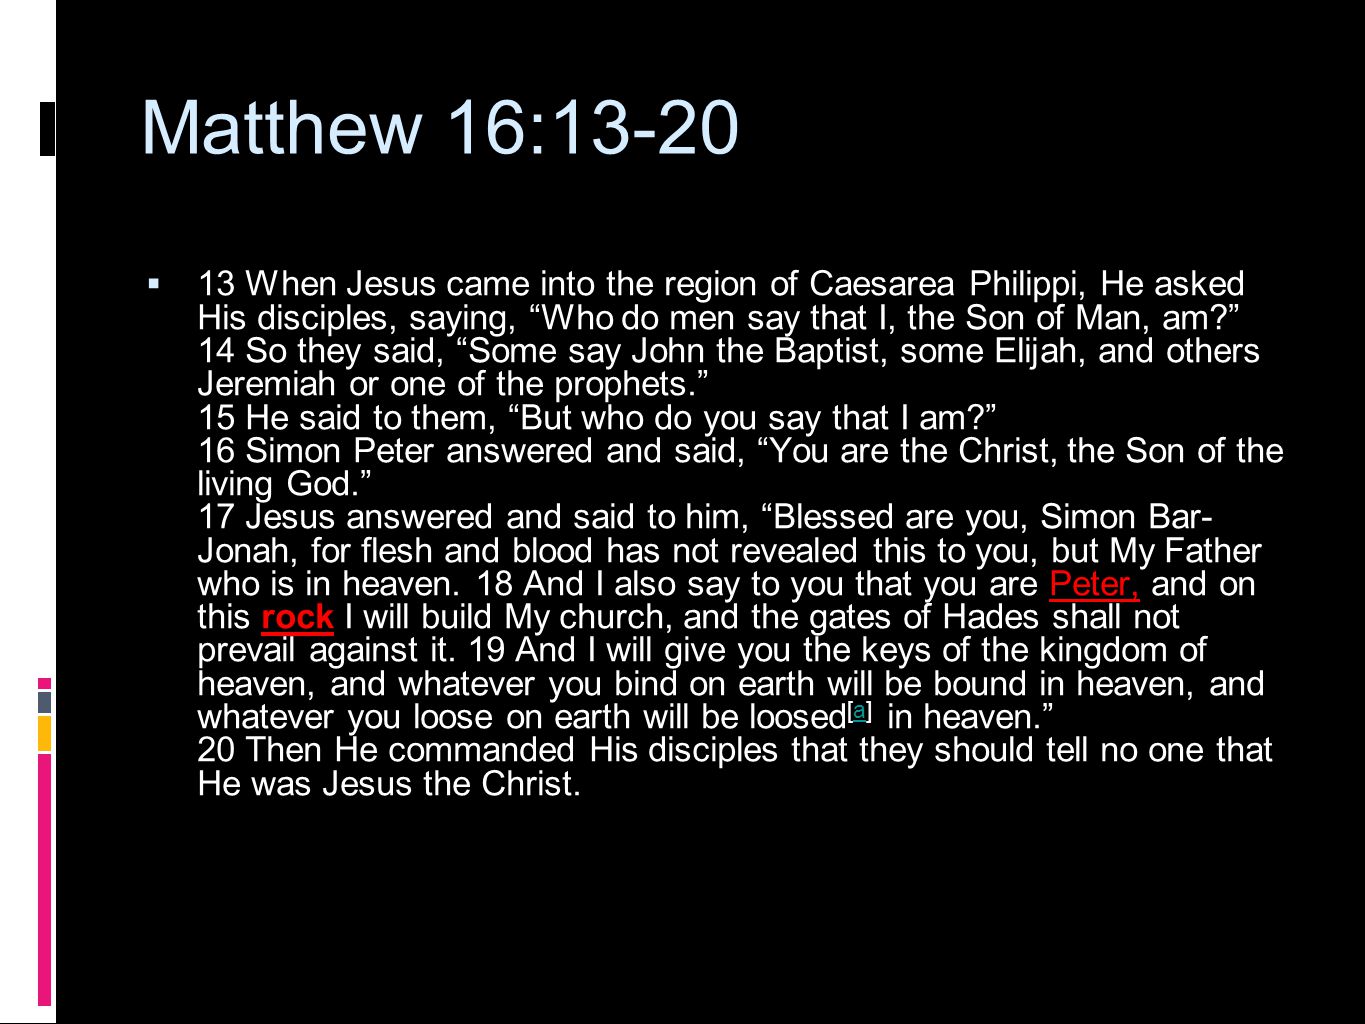 Matthew 16:13-20  13 When Jesus came into the region of Caesarea Philippi, He asked His disciples, saying, Who do men say that I, the Son of Man, am 14 So they said, Some say John the Baptist, some Elijah, and others Jeremiah or one of the prophets. 15 He said to them, But who do you say that I am 16 Simon Peter answered and said, You are the Christ, the Son of the living God. 17 Jesus answered and said to him, Blessed are you, Simon Bar- Jonah, for flesh and blood has not revealed this to you, but My Father who is in heaven.